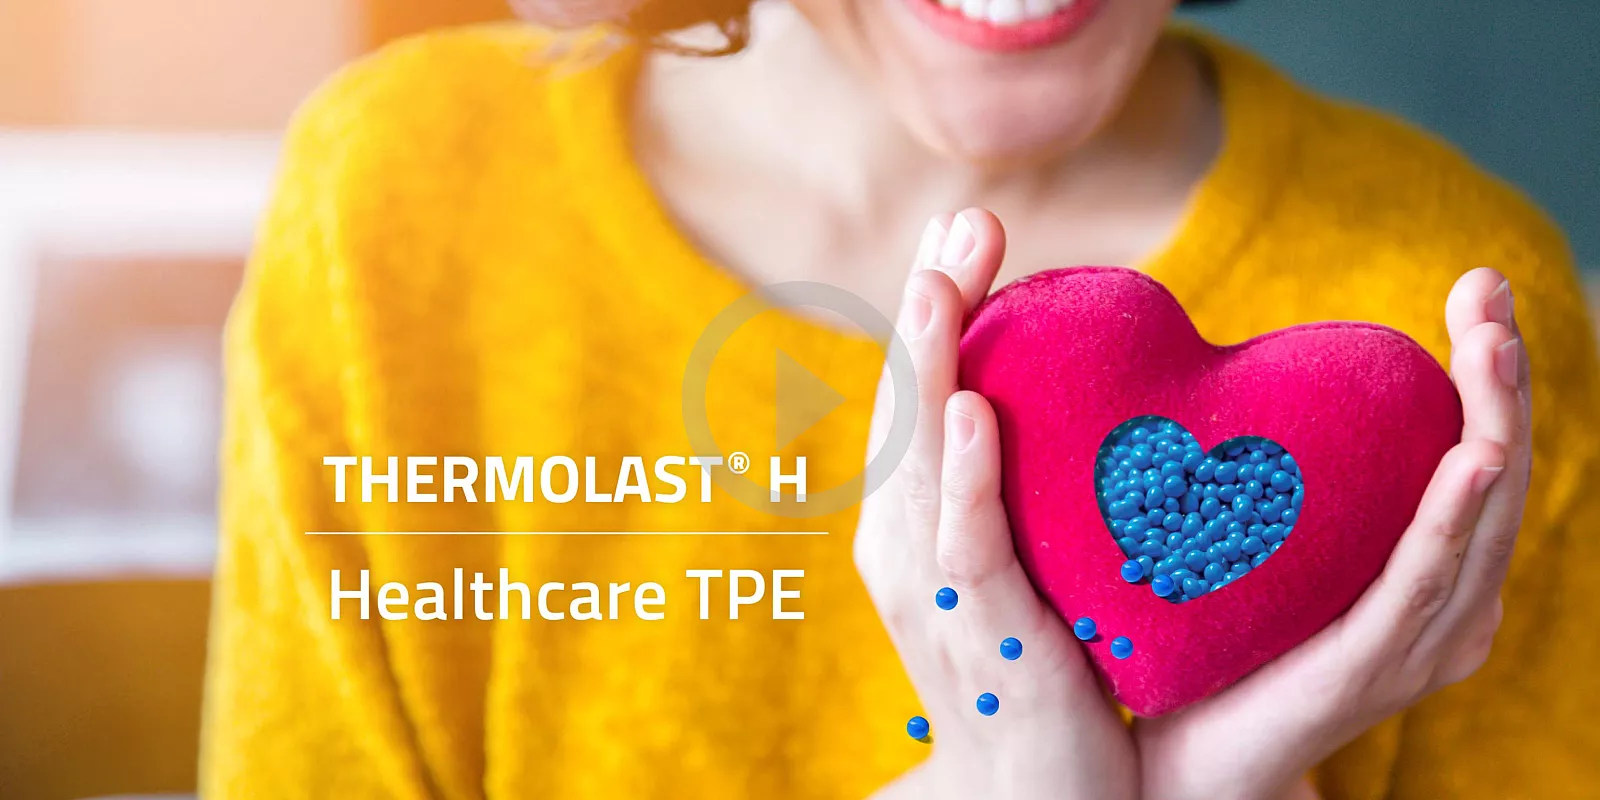 WEB-SEMINAR: Discover how THERMOLAST® H TPE can advance your Healthcare & Medical Applications